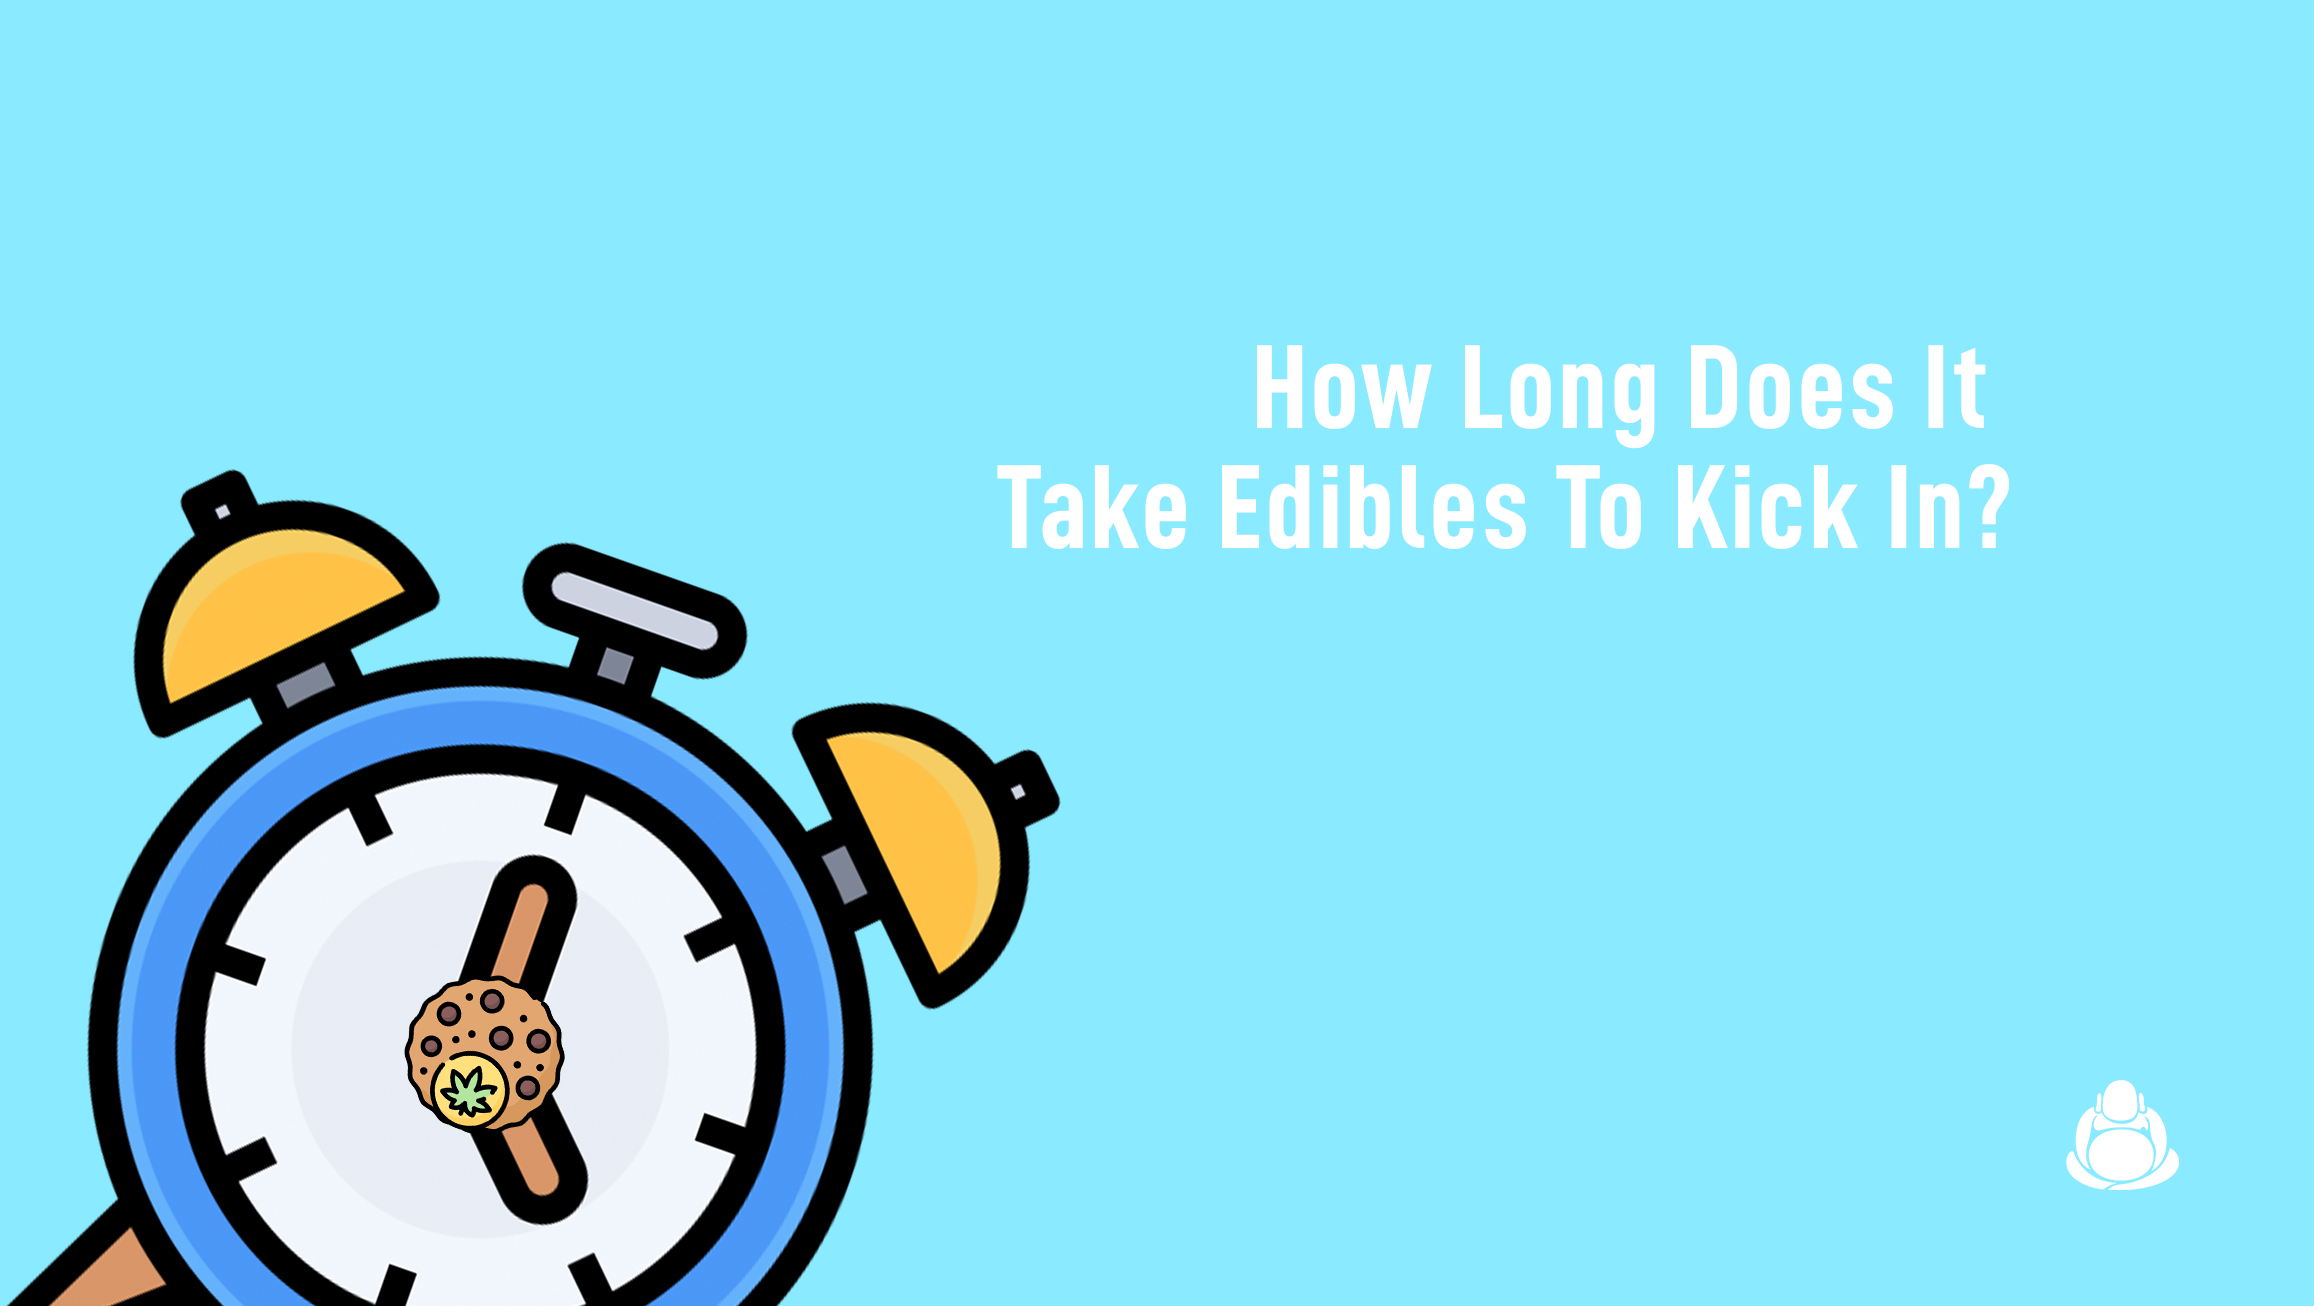 How long does it take for edibles to kick in?